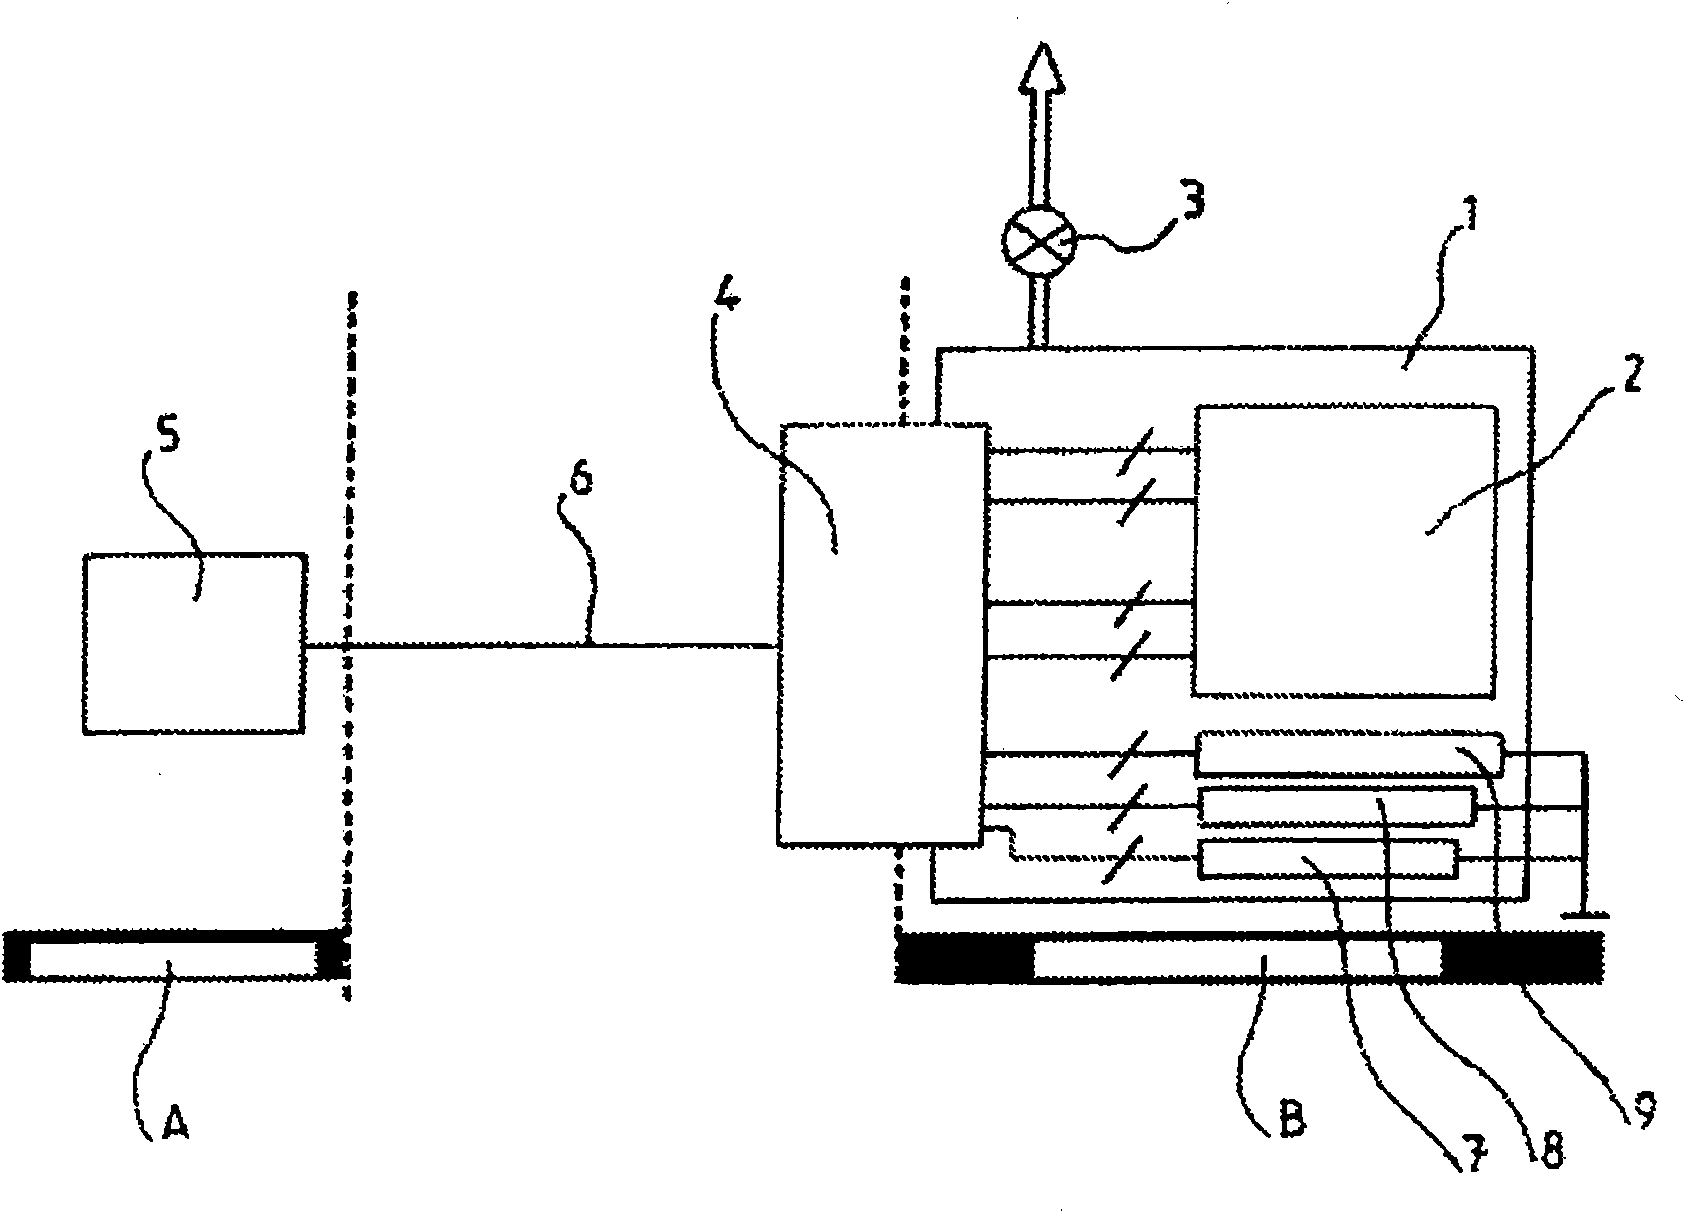 System for managing a reagent dispensing device in an exhaust line